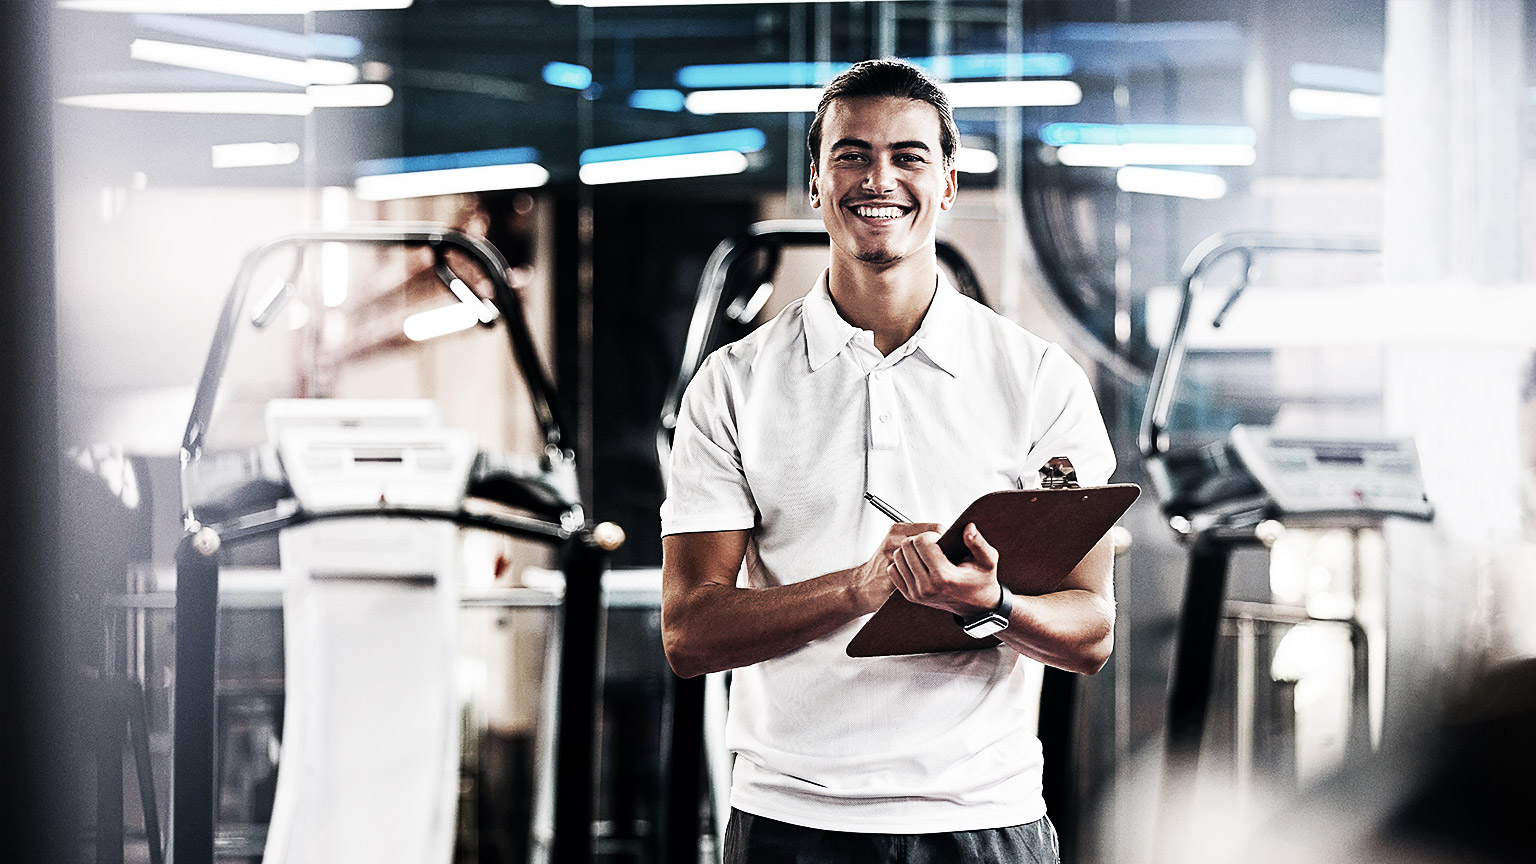 A trainer standing with a smile in the training gym